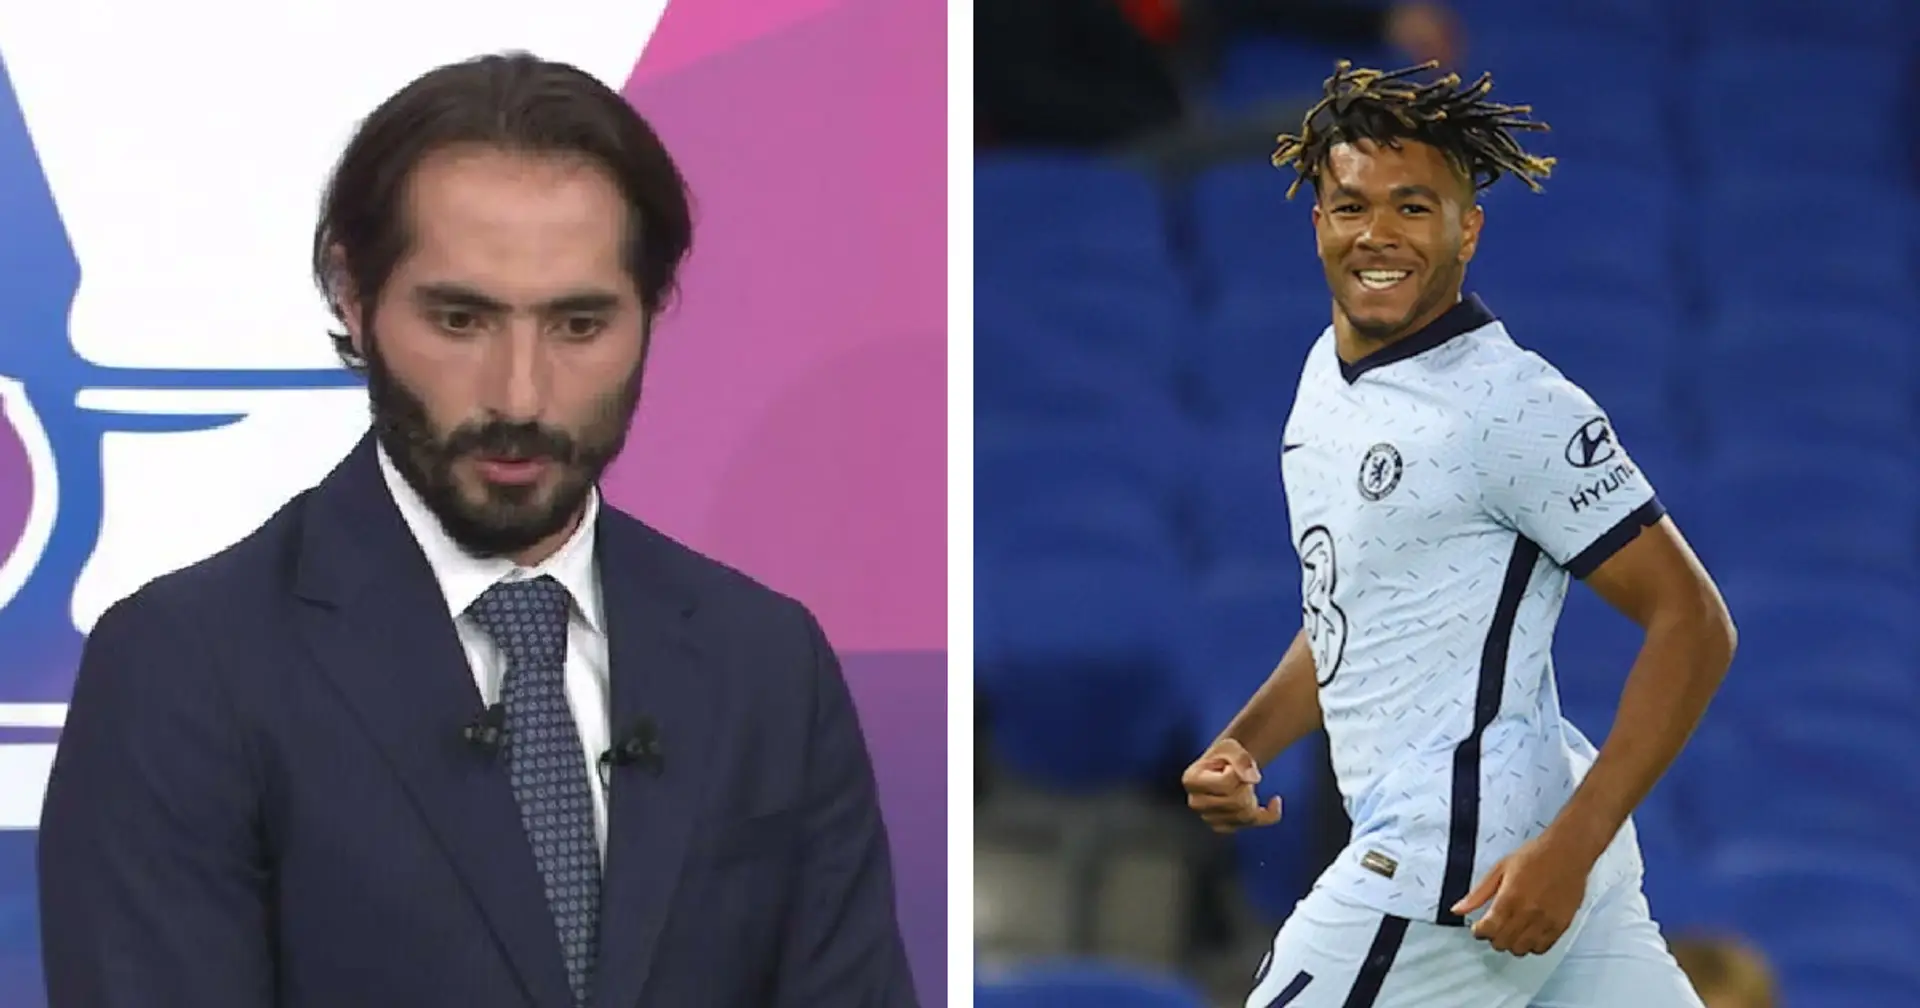 Southgate raves about Reece James, Blues fans hail unlikely hero Altintop: Latest Chelsea News round-up